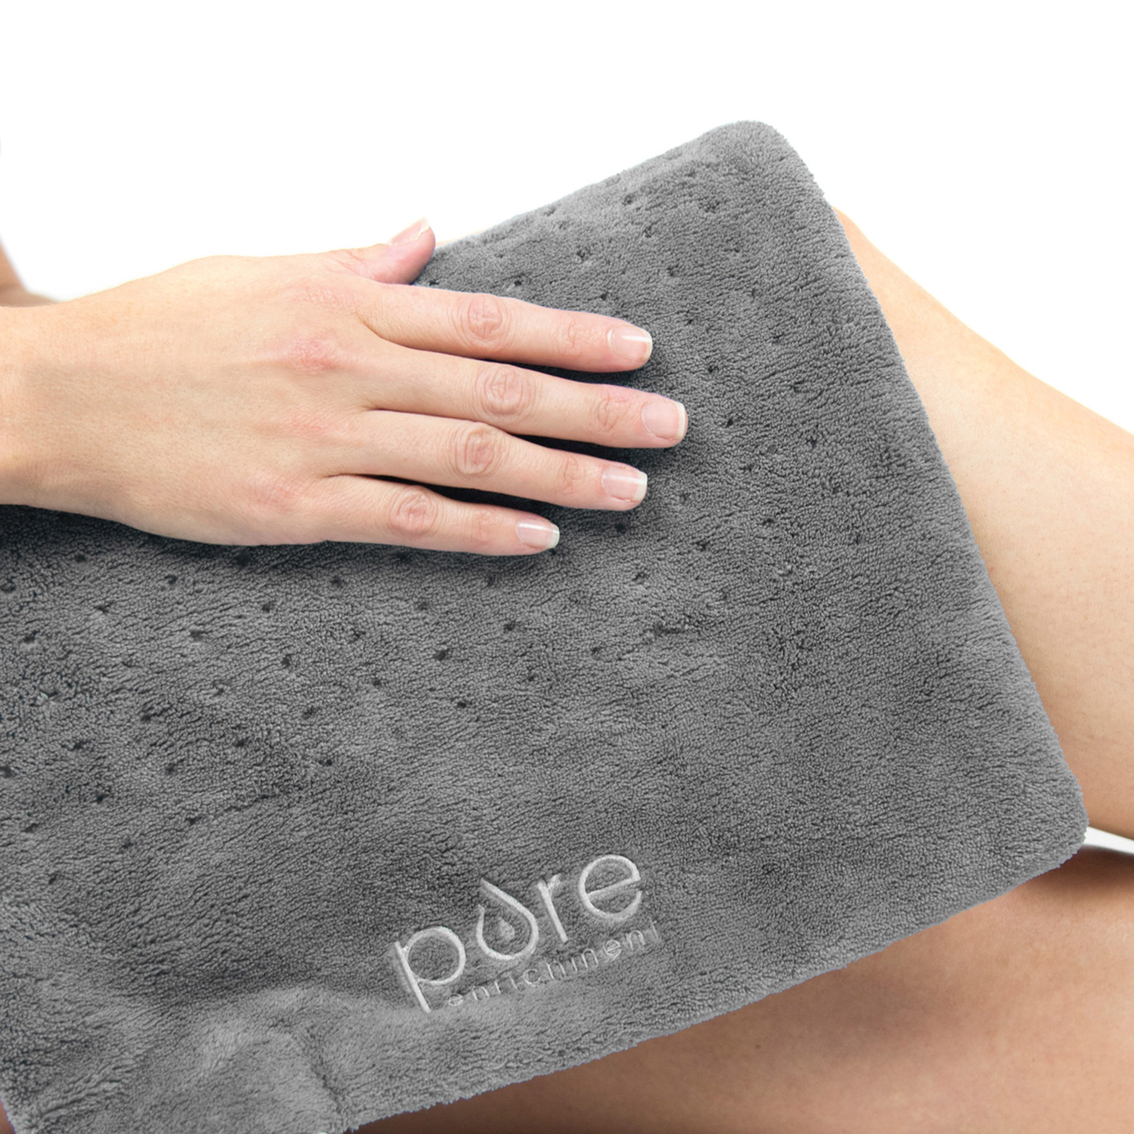 Pure Enrichment PureRelief Deluxe Heating Pad 12 x 24 in. - Image 2 of 5